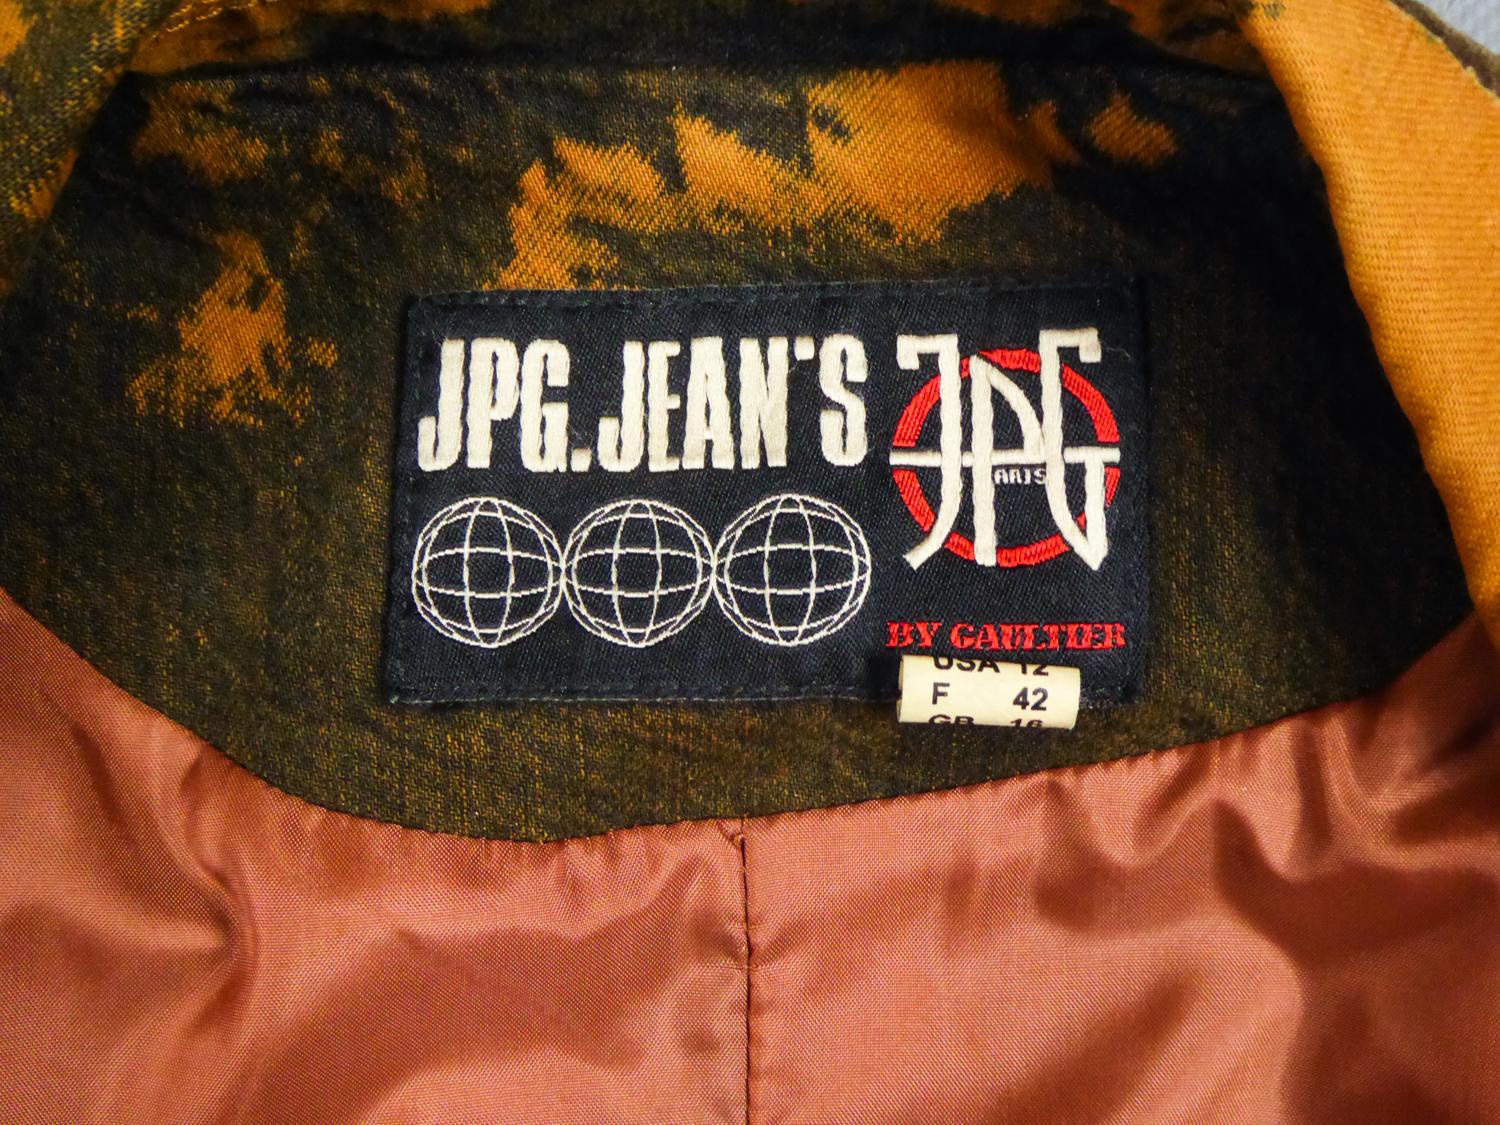 Brown A Jean-Paul Gaultier Jacket of Military Inspiration Circa 2005/2010